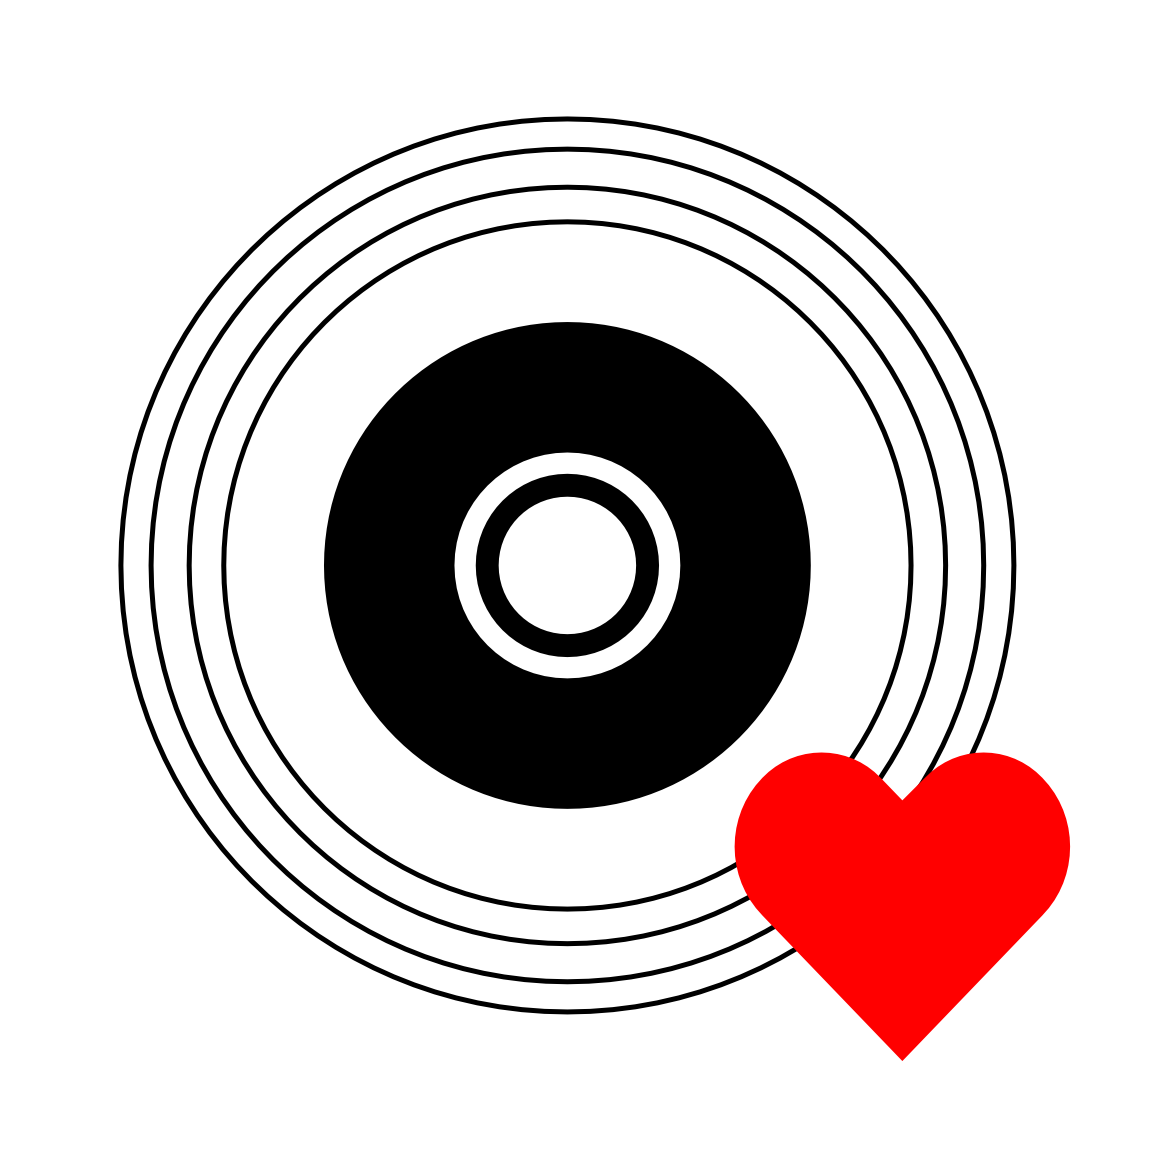 A picture of the Songish logo next to a heart.